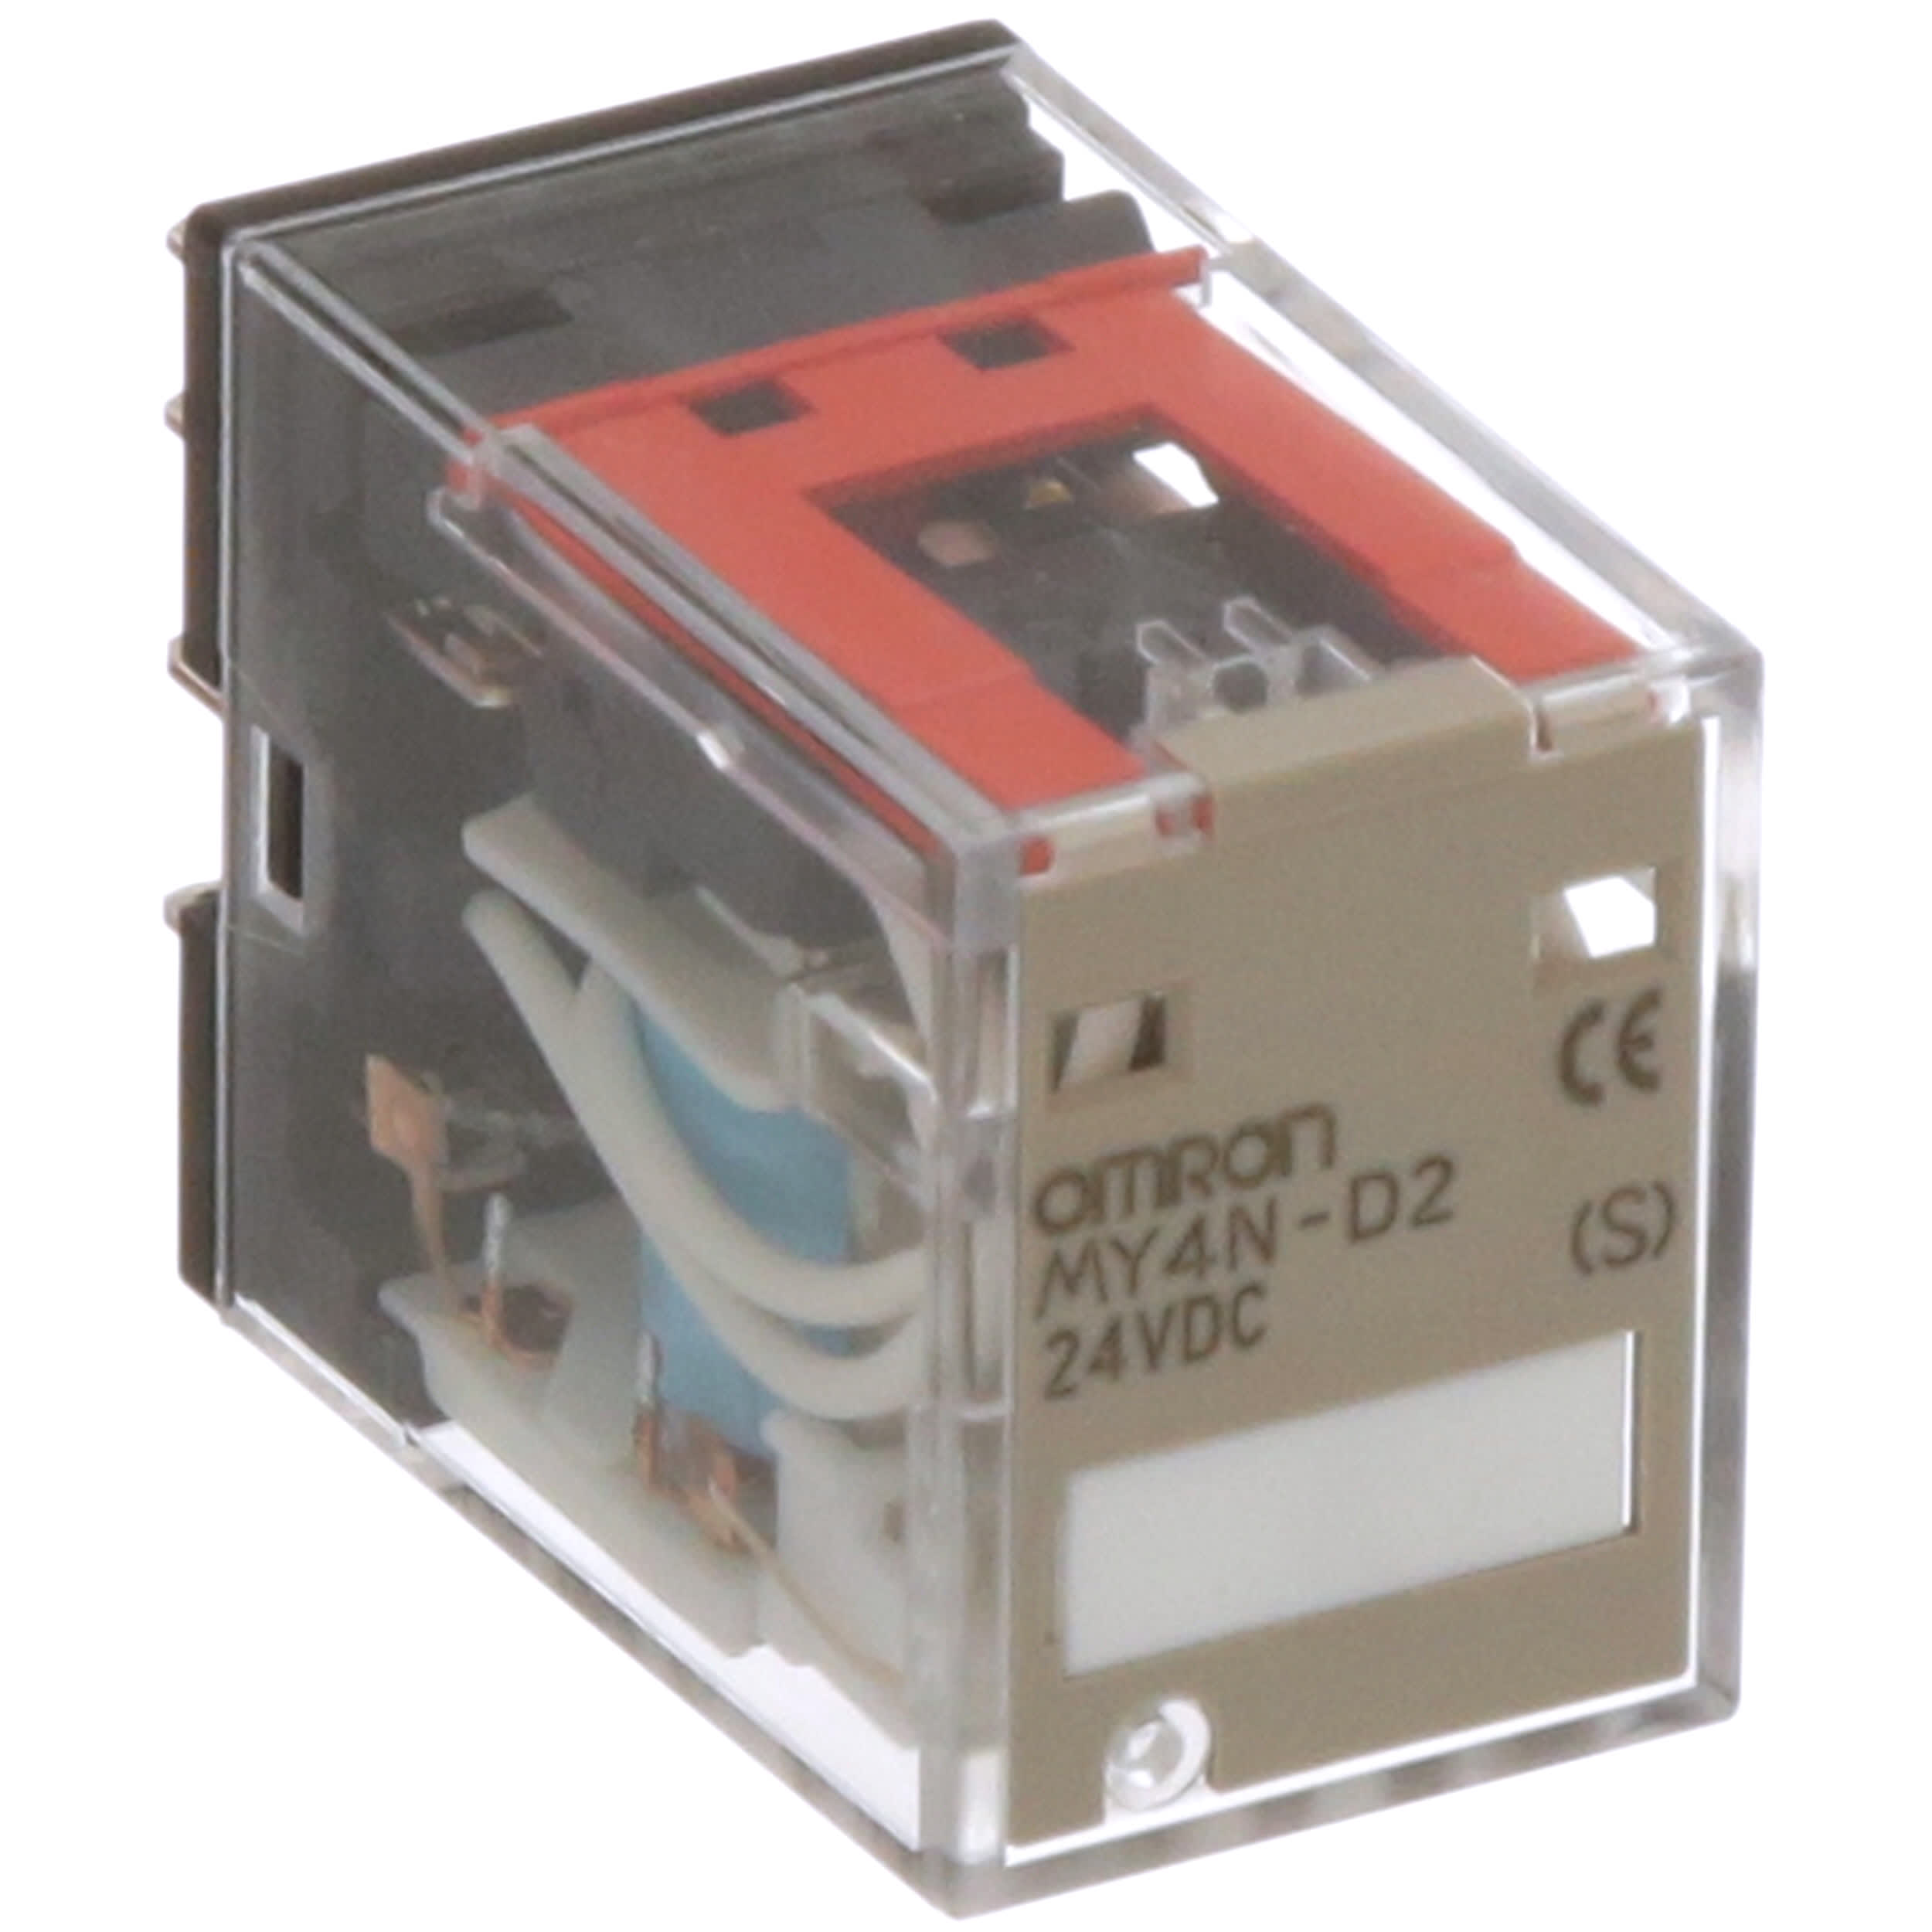 Omron 24vdc Relay My4n-d2 With Base 3031ya for sale online 